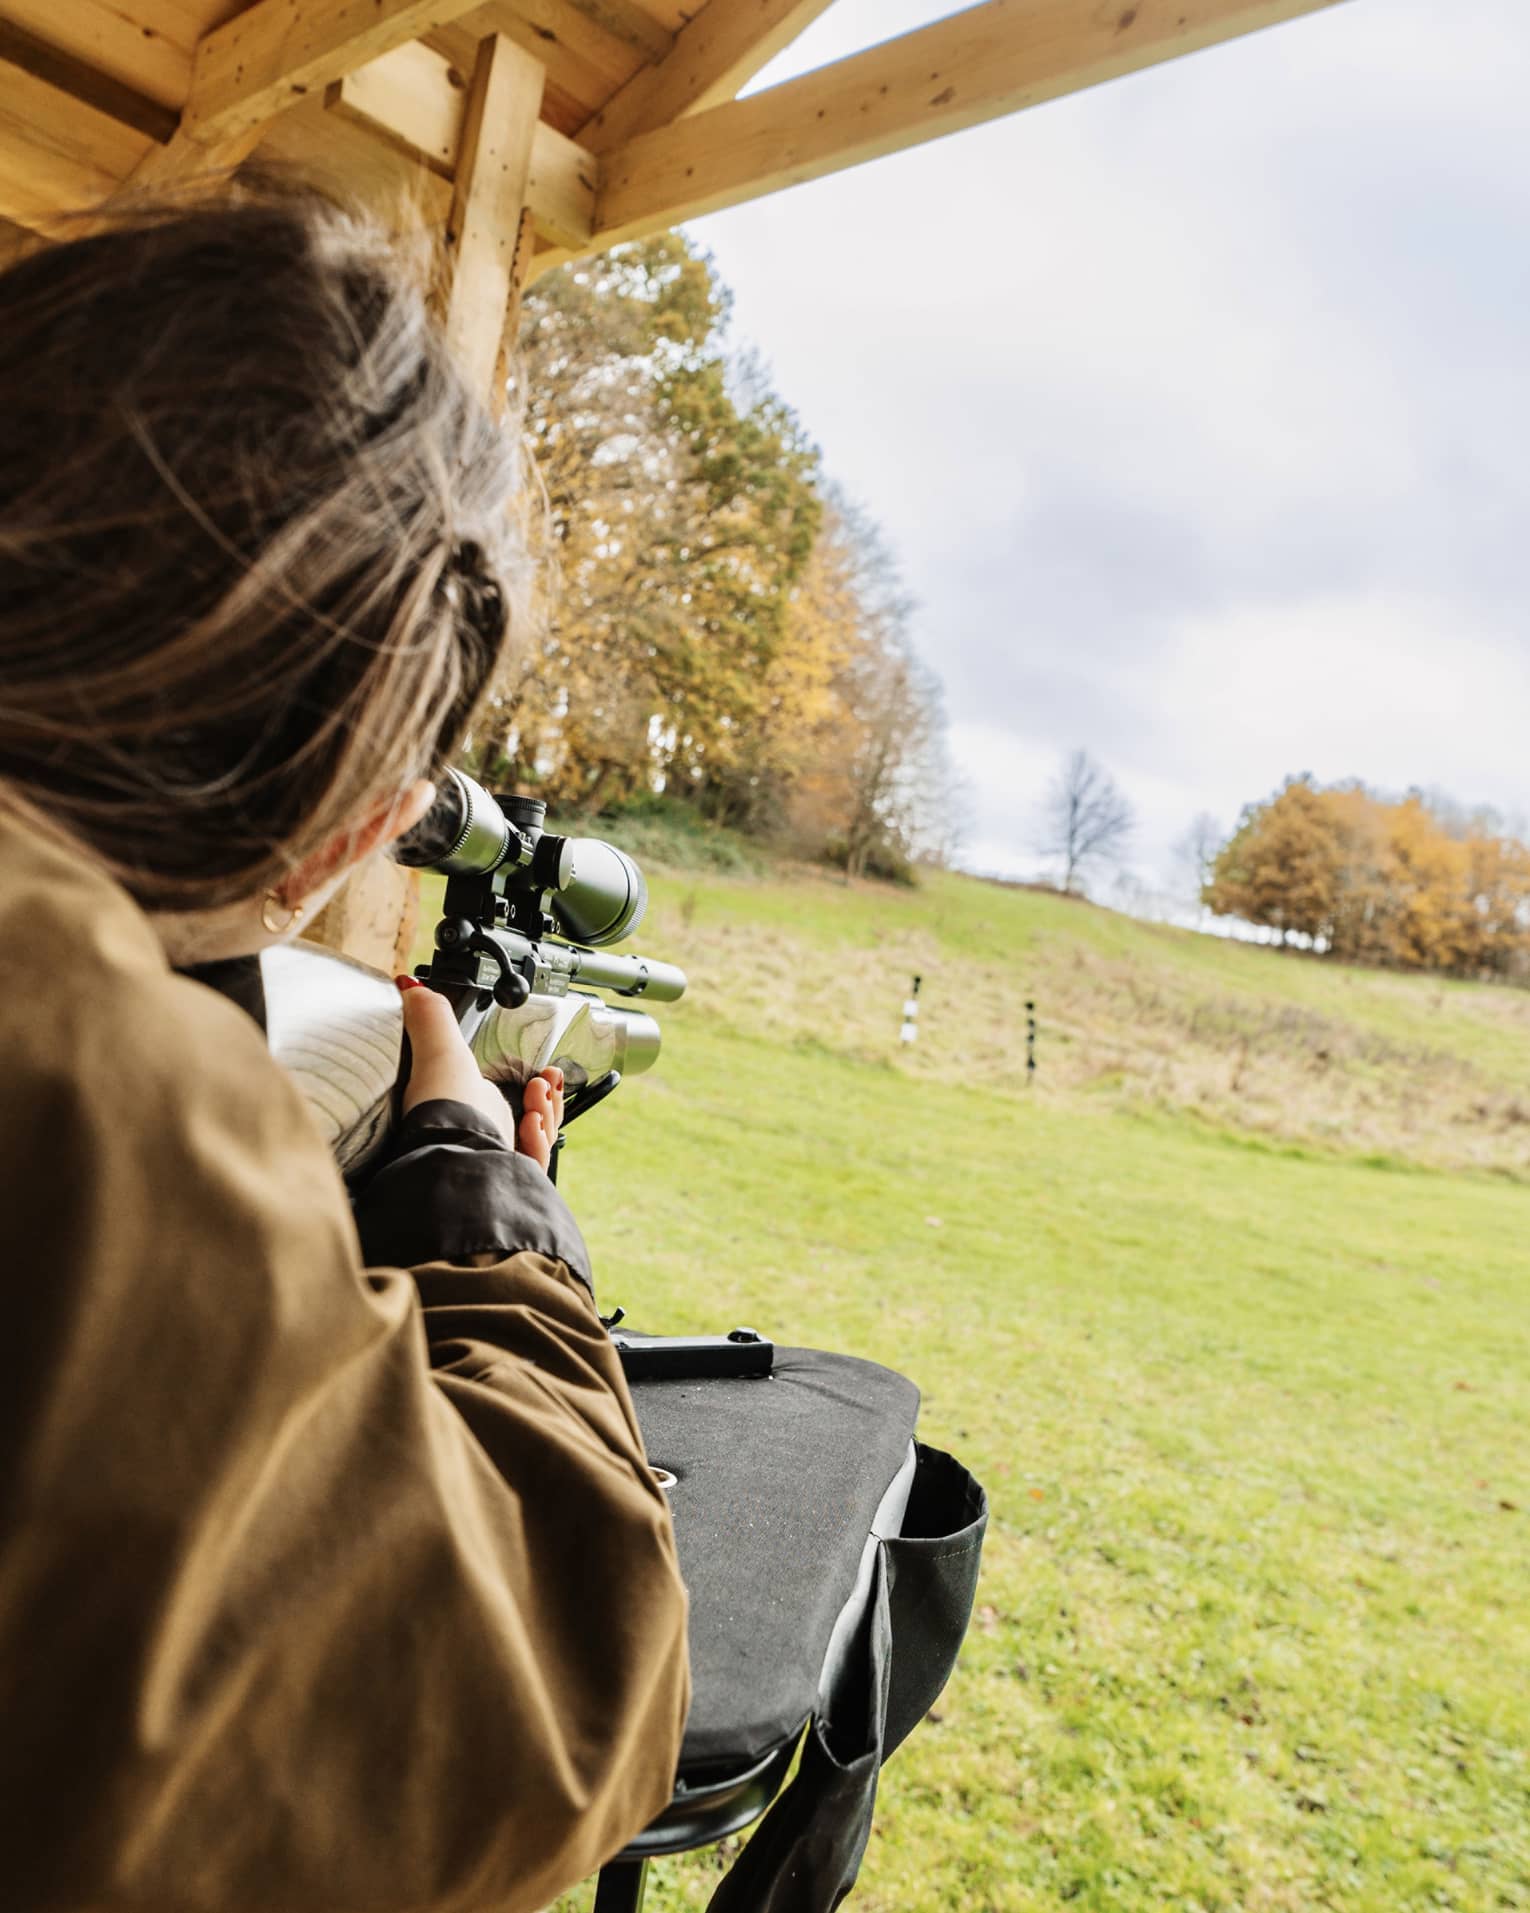 Rear view of a person in a brown jacket aiming an air rifle at small, distant targets in a large field amid autumn trees.